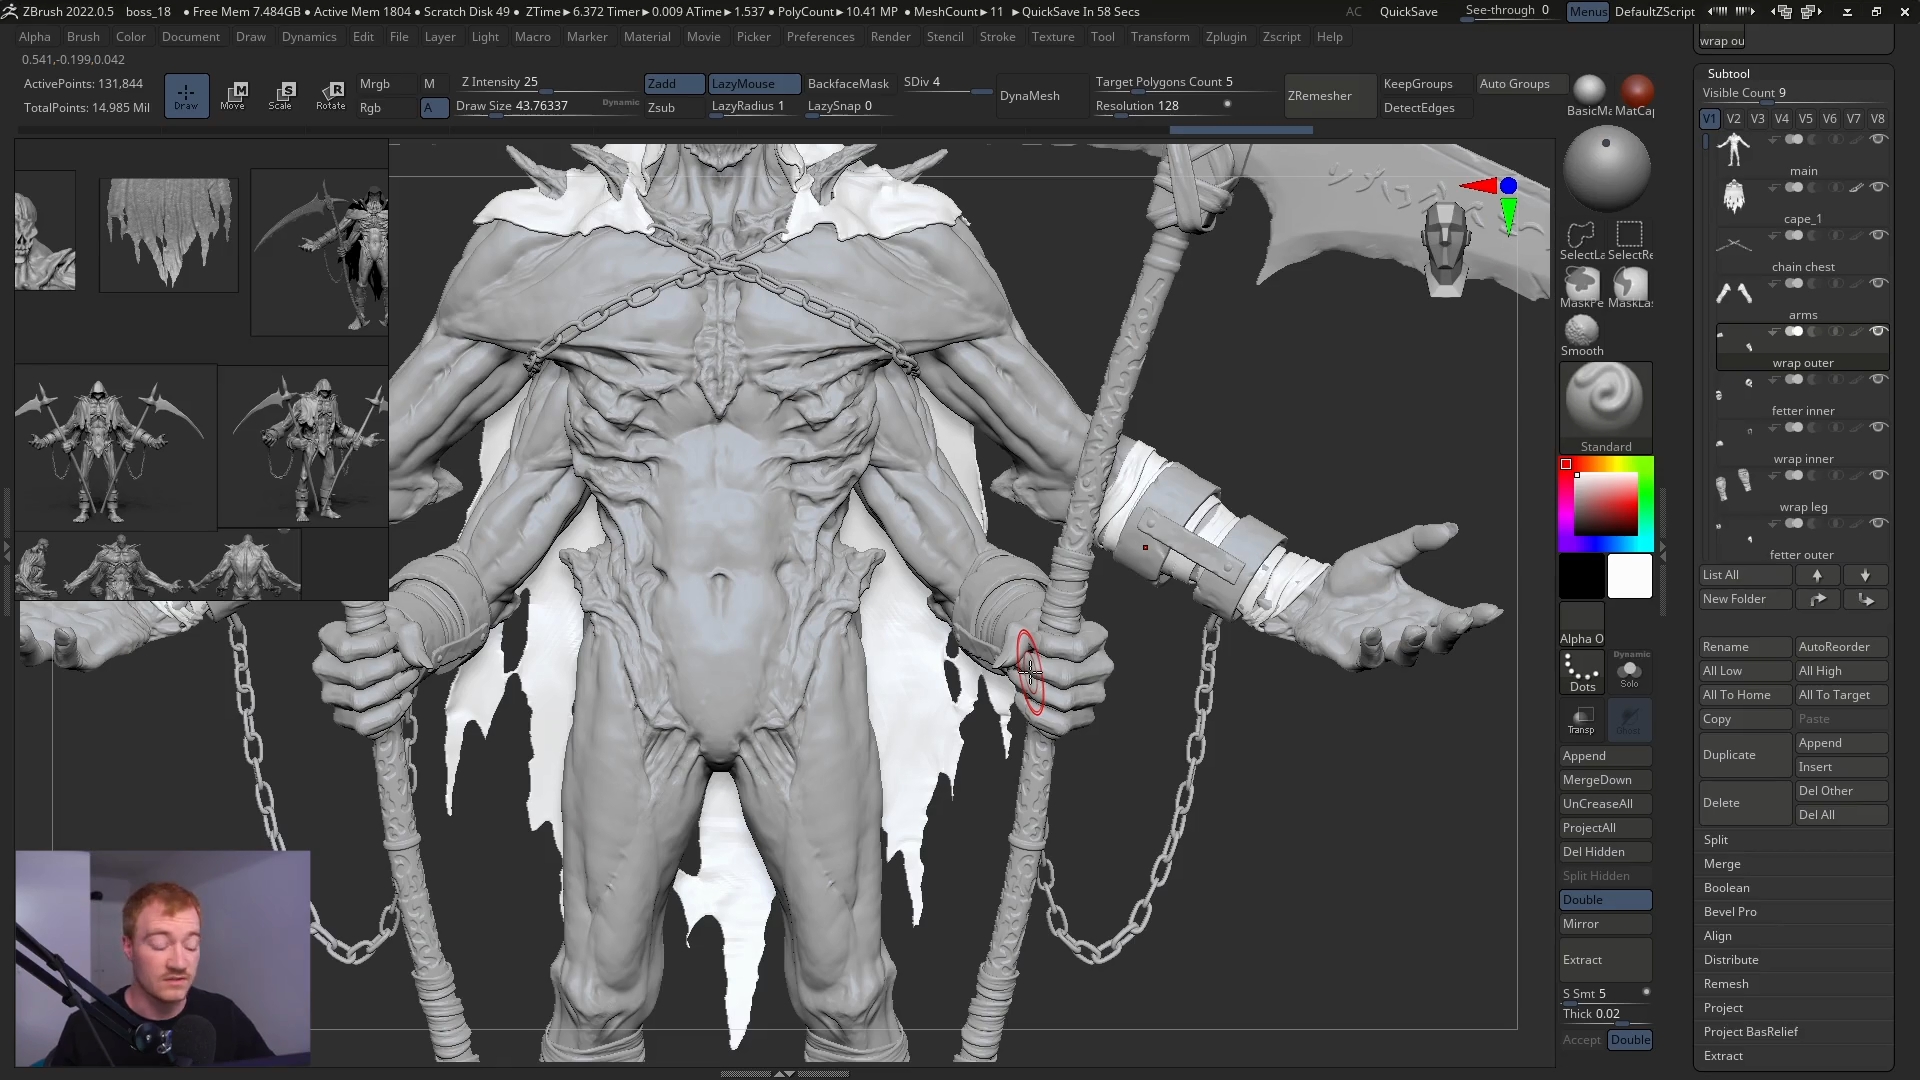 Creating a Full Character in Zbrush